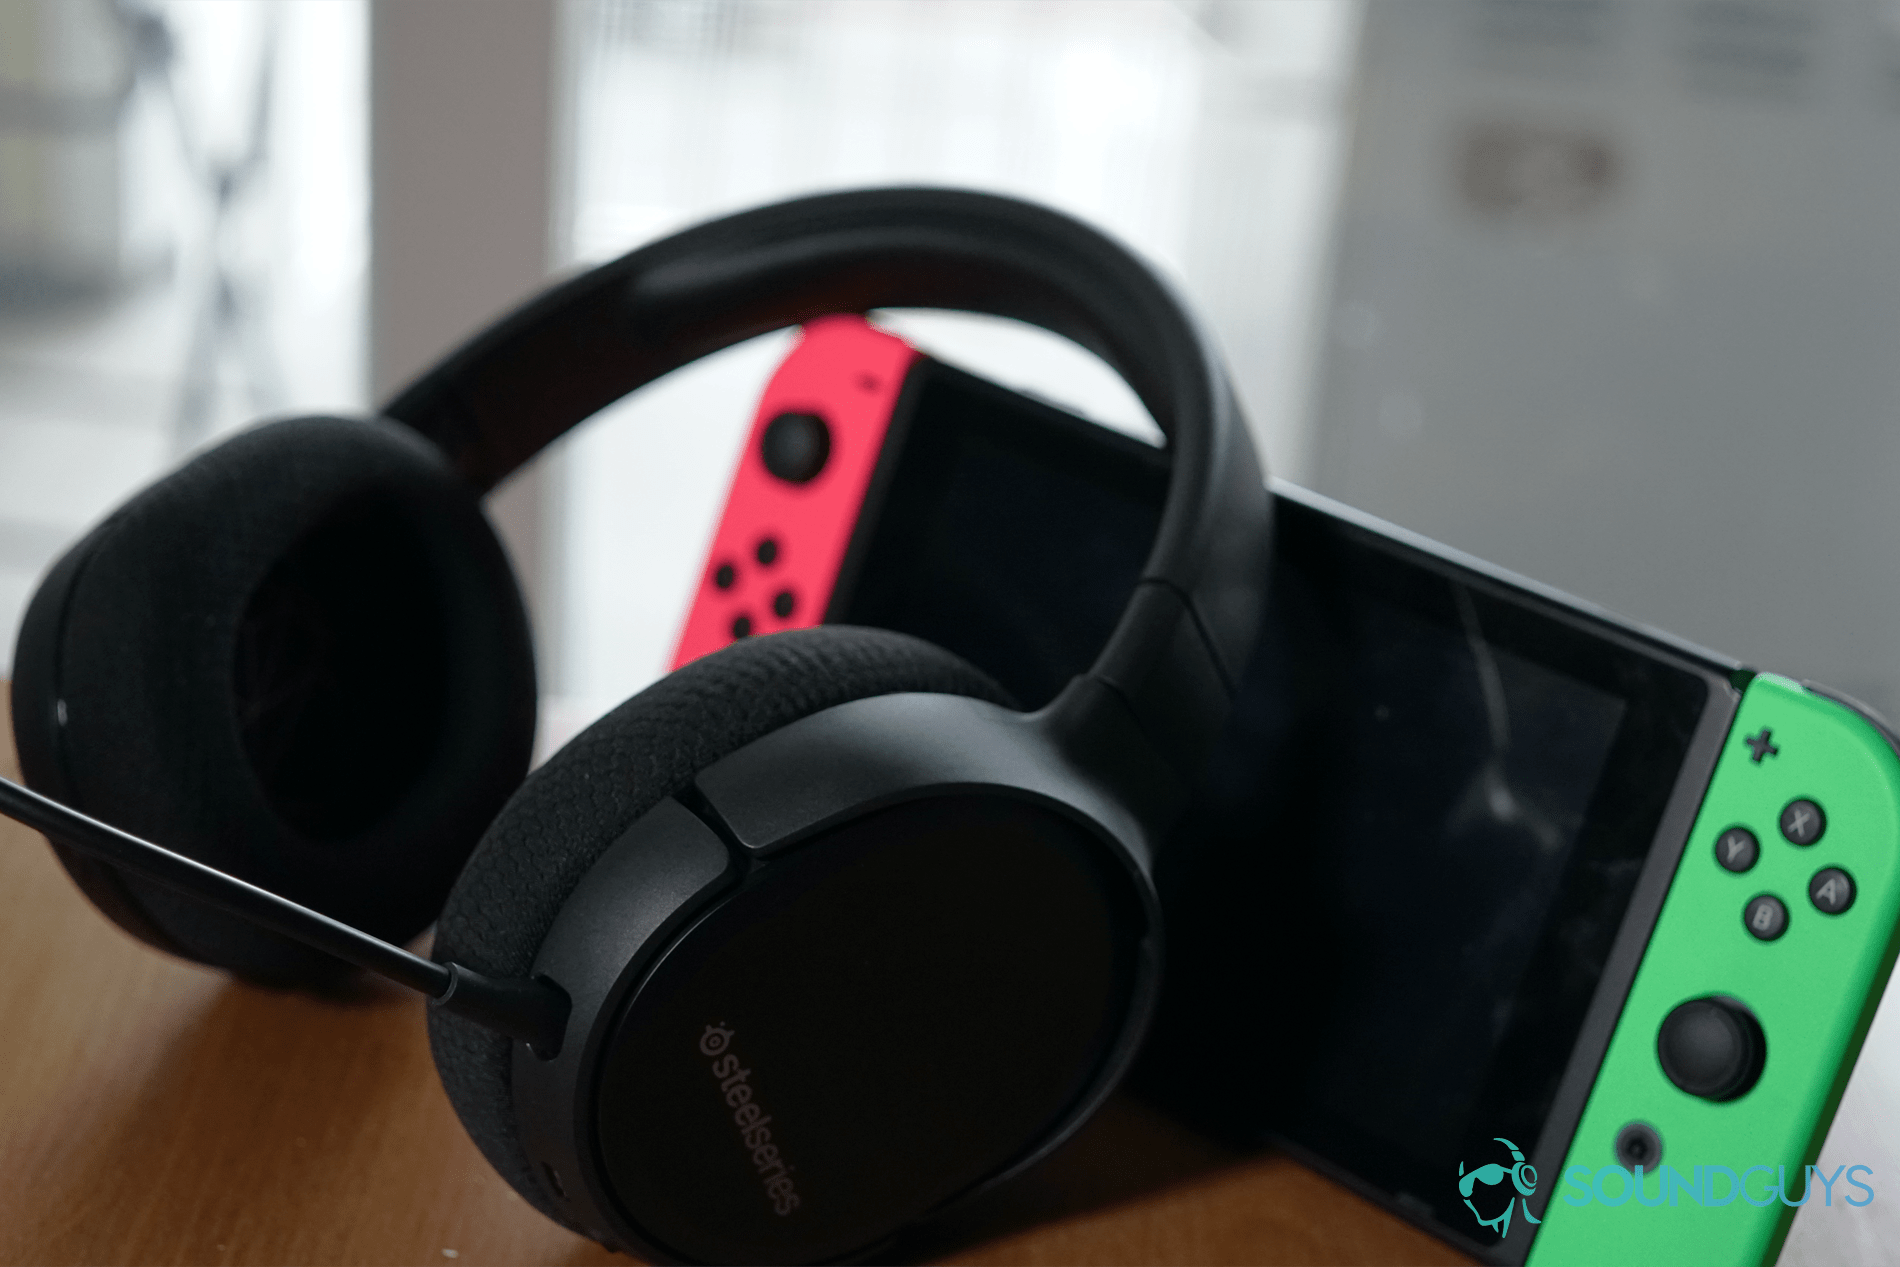 SteelSeries Arctis Nova 1 wired headset: Surround-sound gaming on a budget